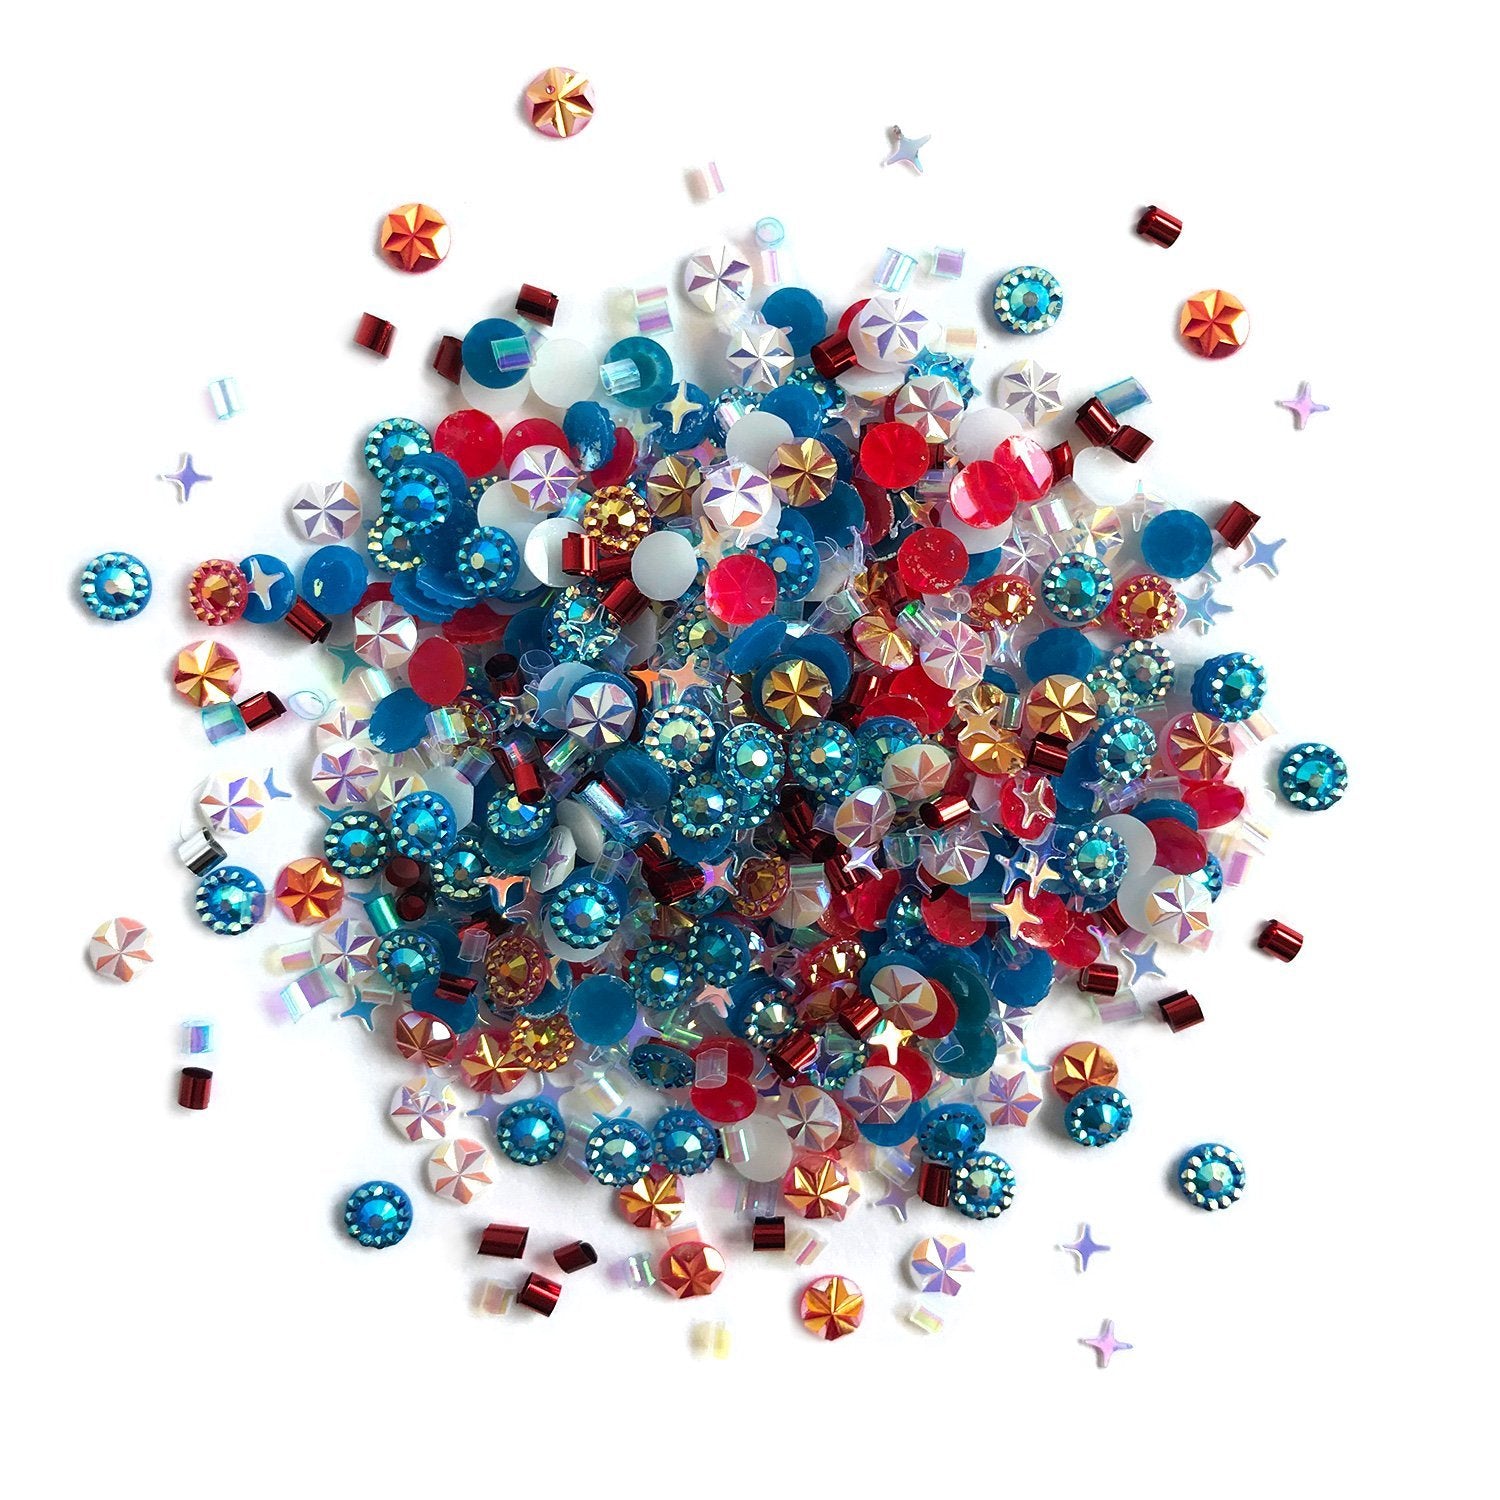 Red & Blue Gems & Jewels for Crafts & Jewelry Making